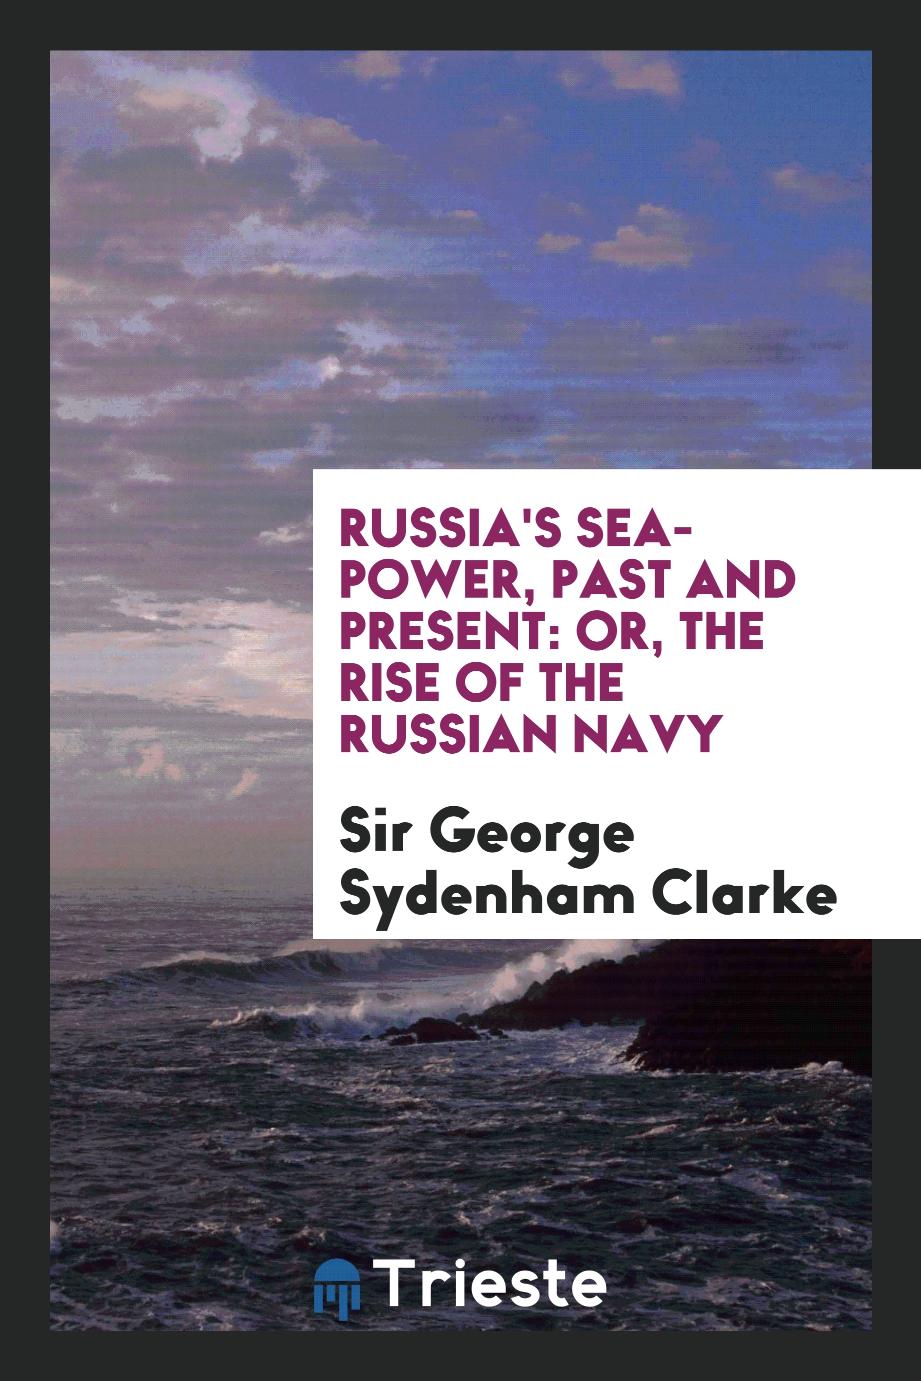 Russia's Sea-Power, Past and Present: Or, The Rise of the Russian Navy